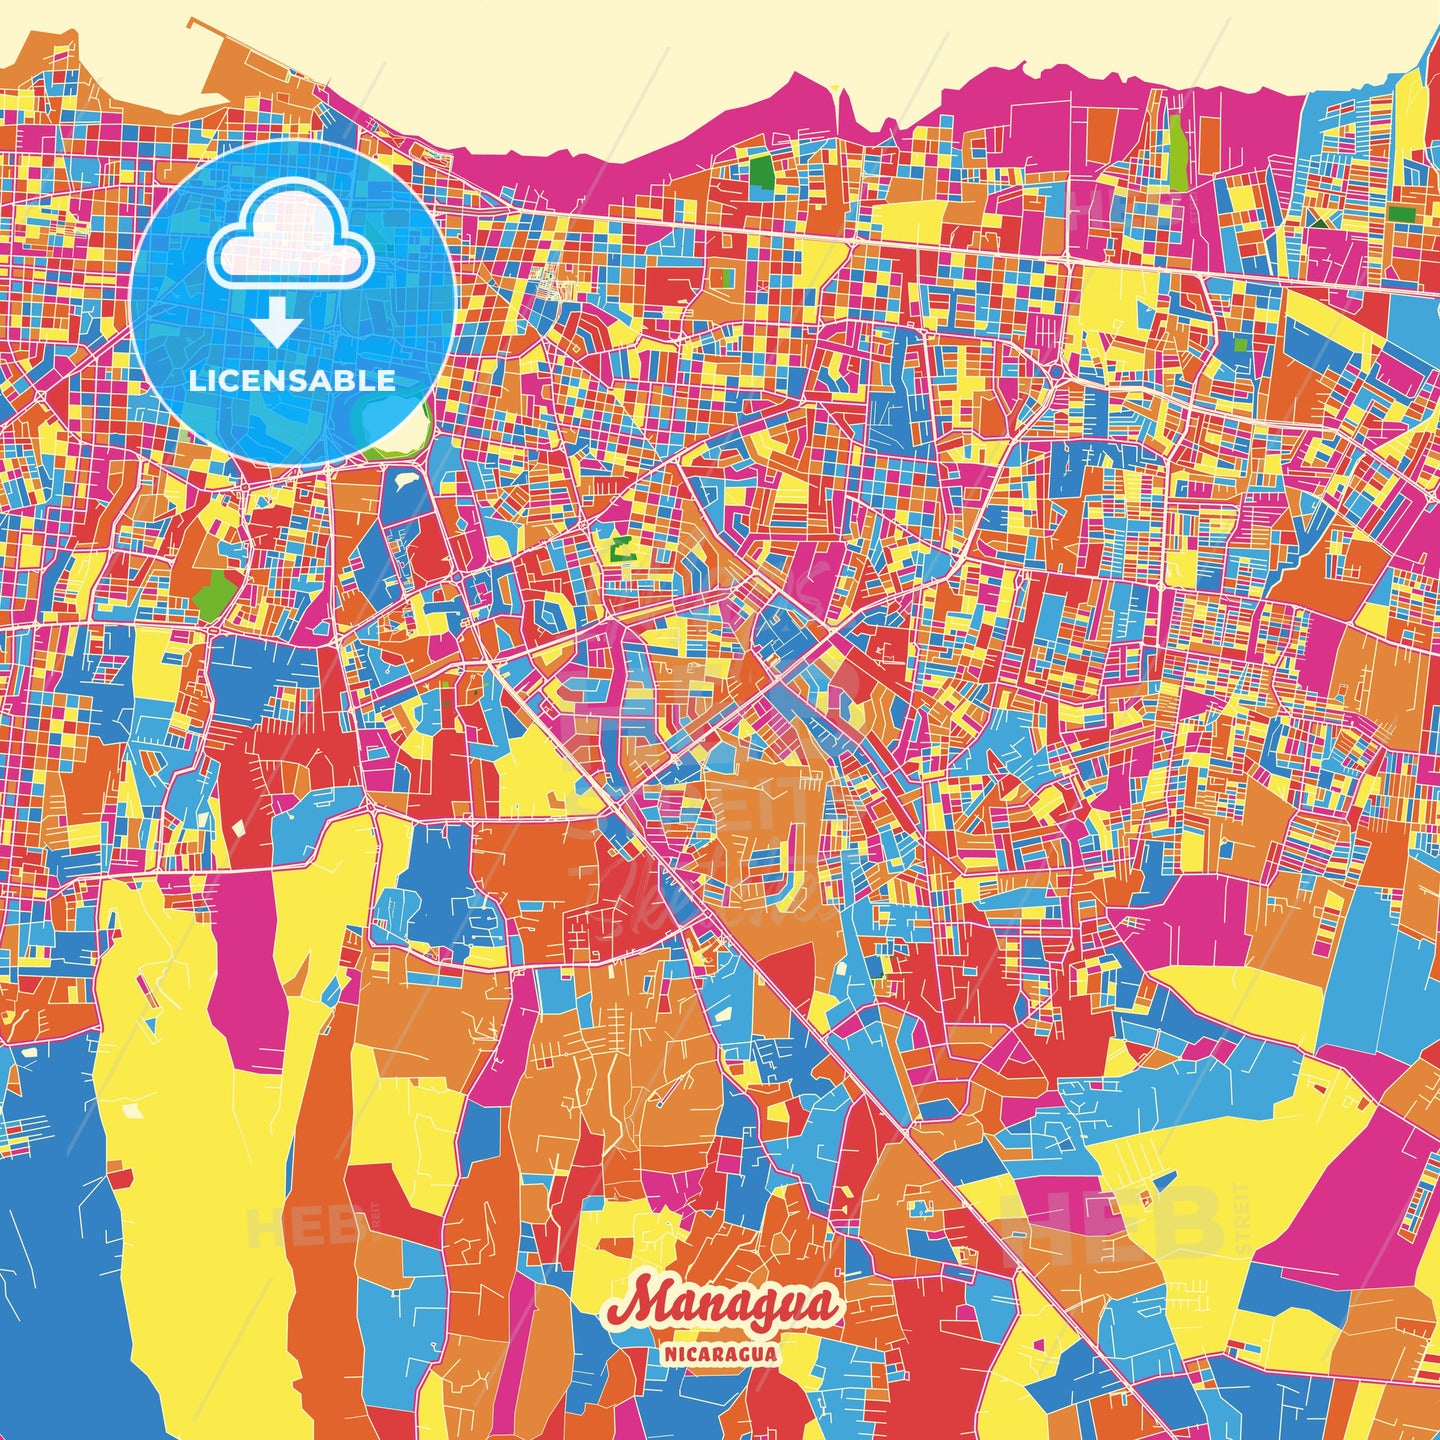 Managua, Nicaragua Crazy Colorful Street Map Poster Template - HEBSTREITS Sketches